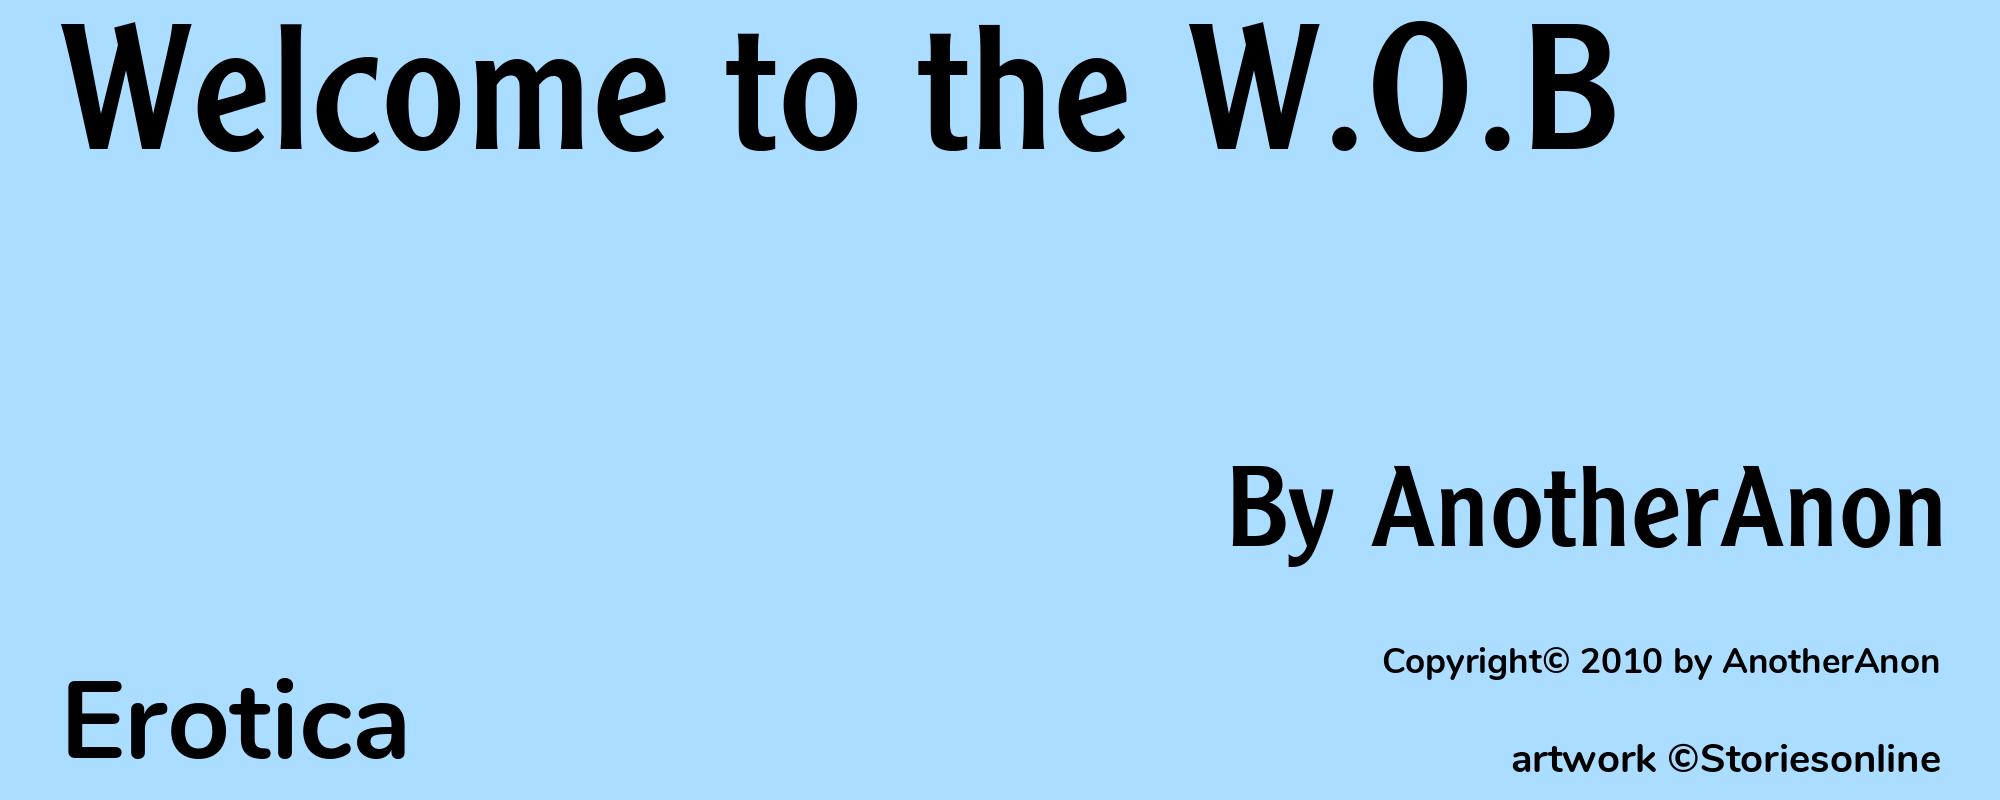 Welcome to the W.O.B - Cover